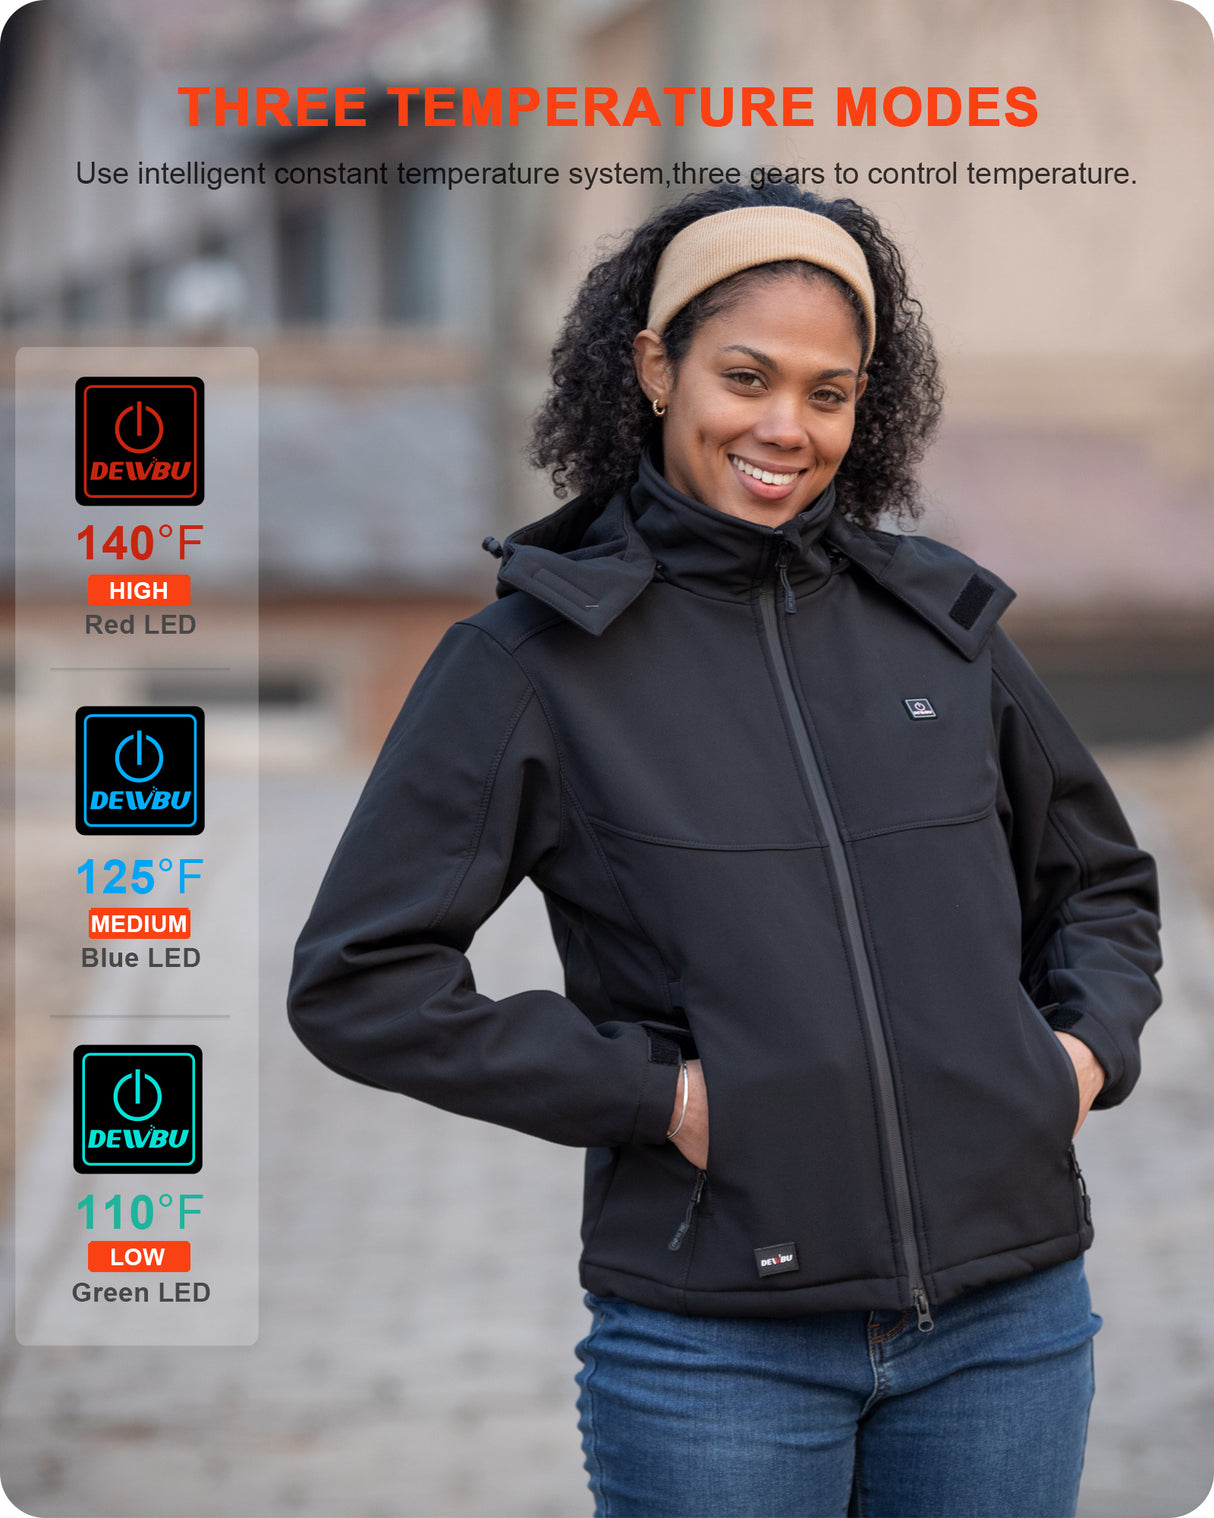 Women's Heated Jacket Detachable Hood With 12V Battery Pack - Black